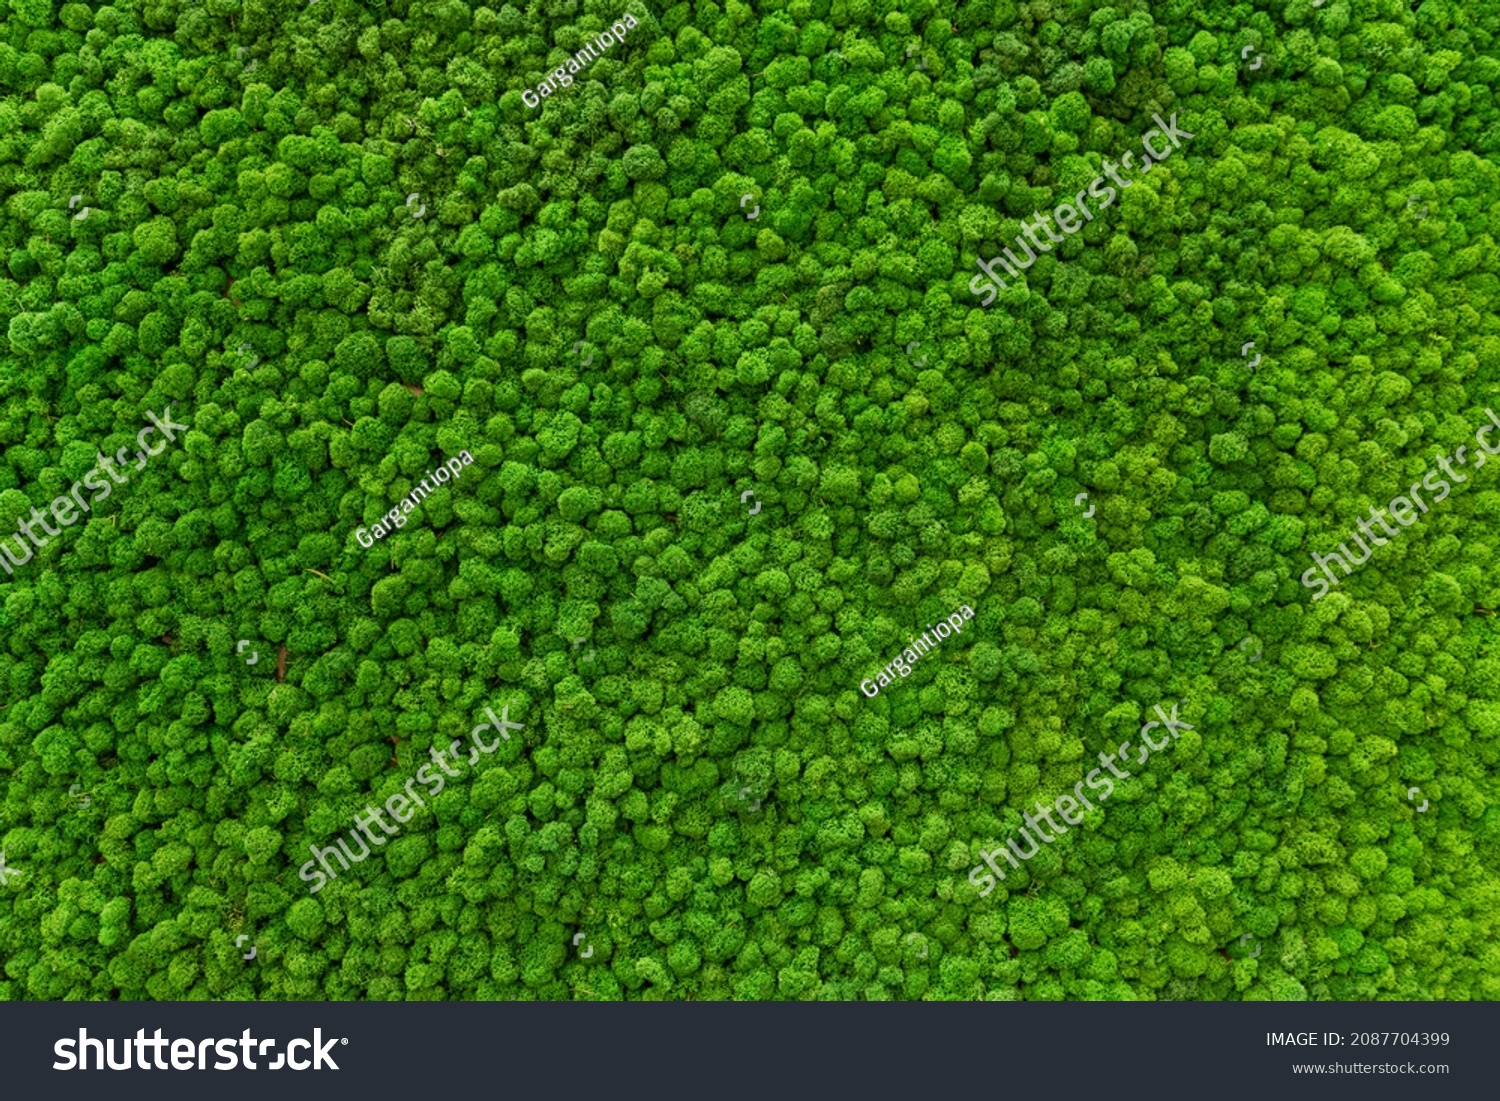 Close-up surface of the wall covered with green moss. Modern eco friendly decor made of colored stabilized moss. Natural background for design and text. #2087704399